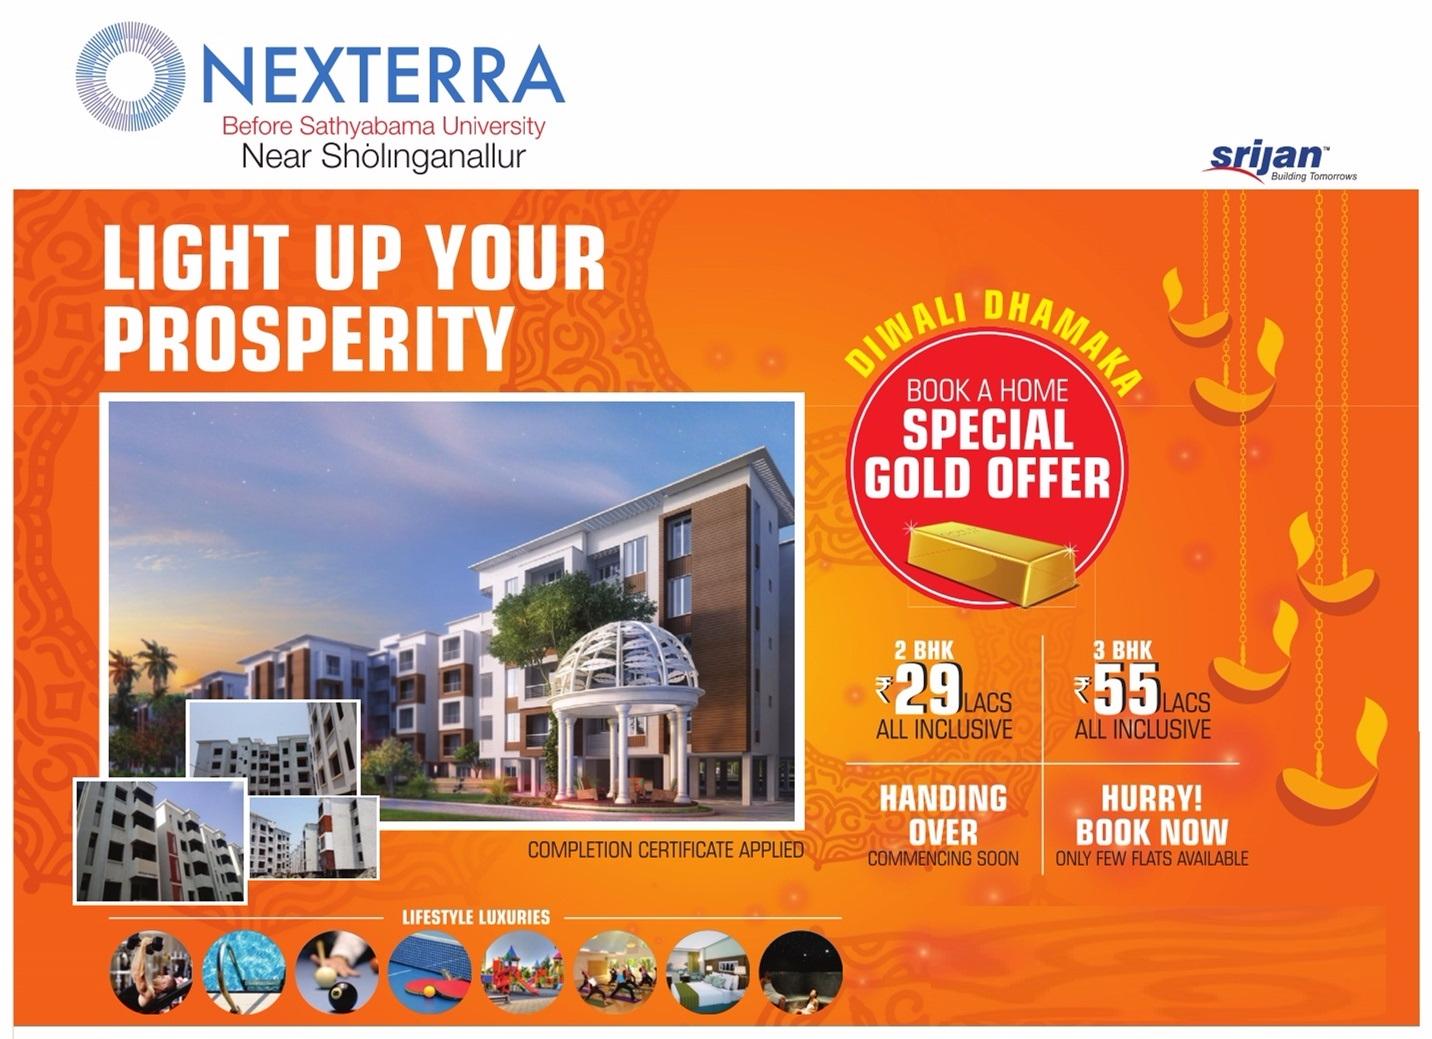 Light up your prosperity with book a home special gold offer at PS Srijan Nexterra in Chennai Update